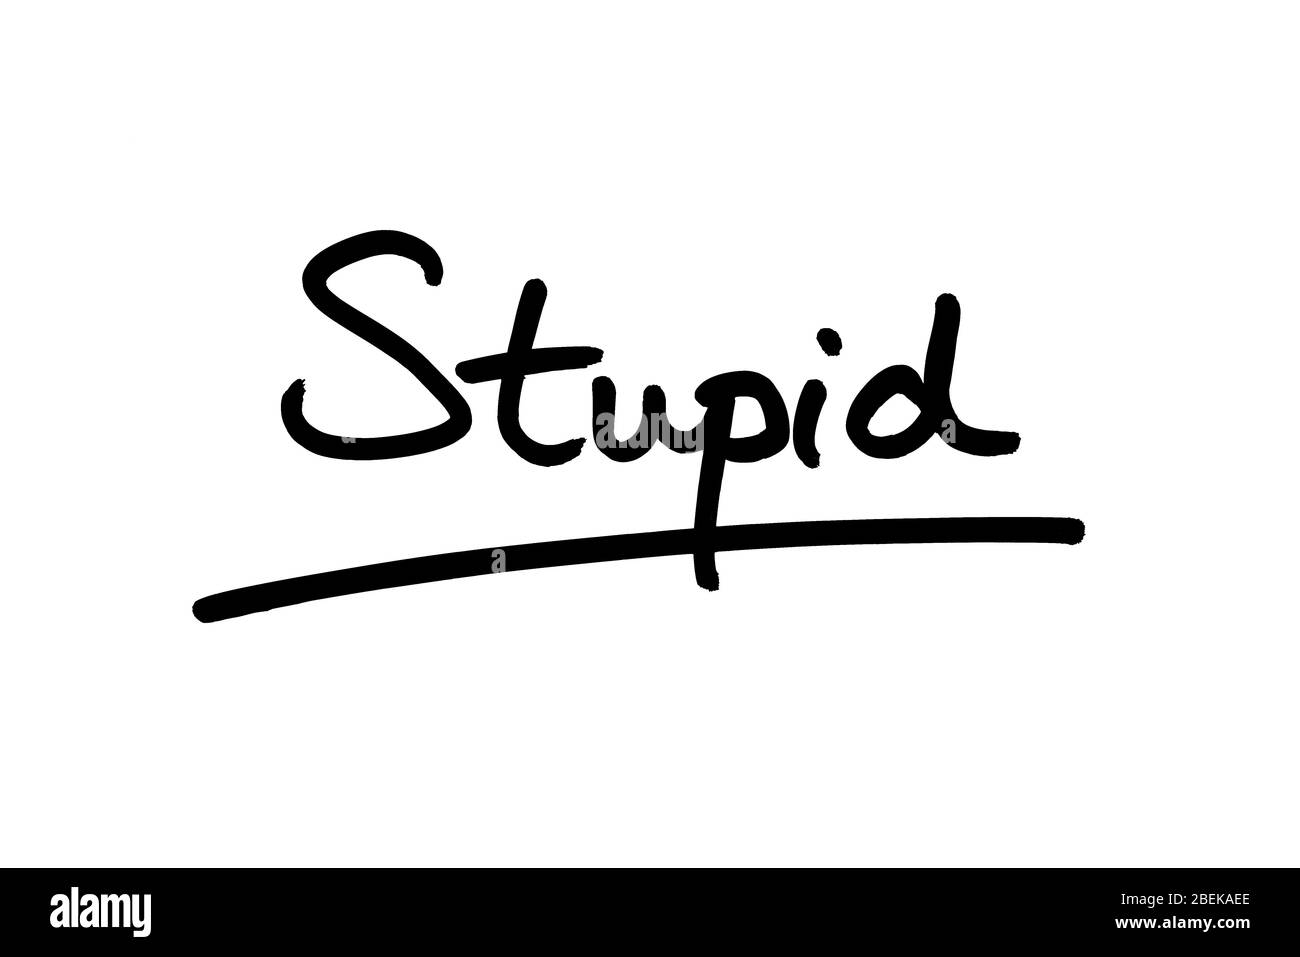 The word Stupid handwritten on a white background. Stock Photo